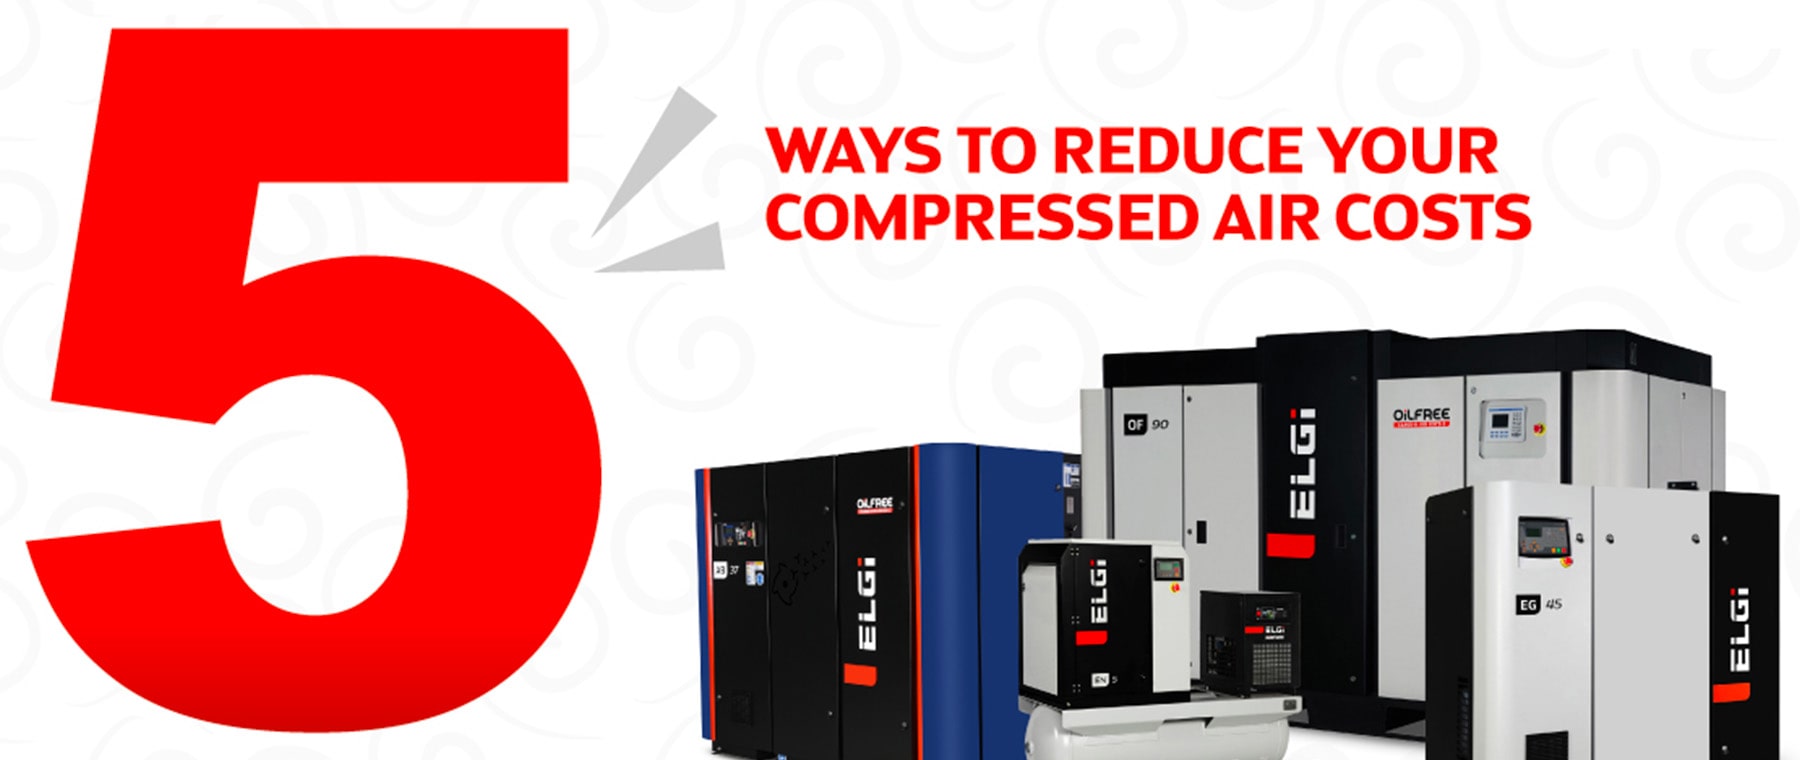 Top 5 ways to reduce your compressed air costs